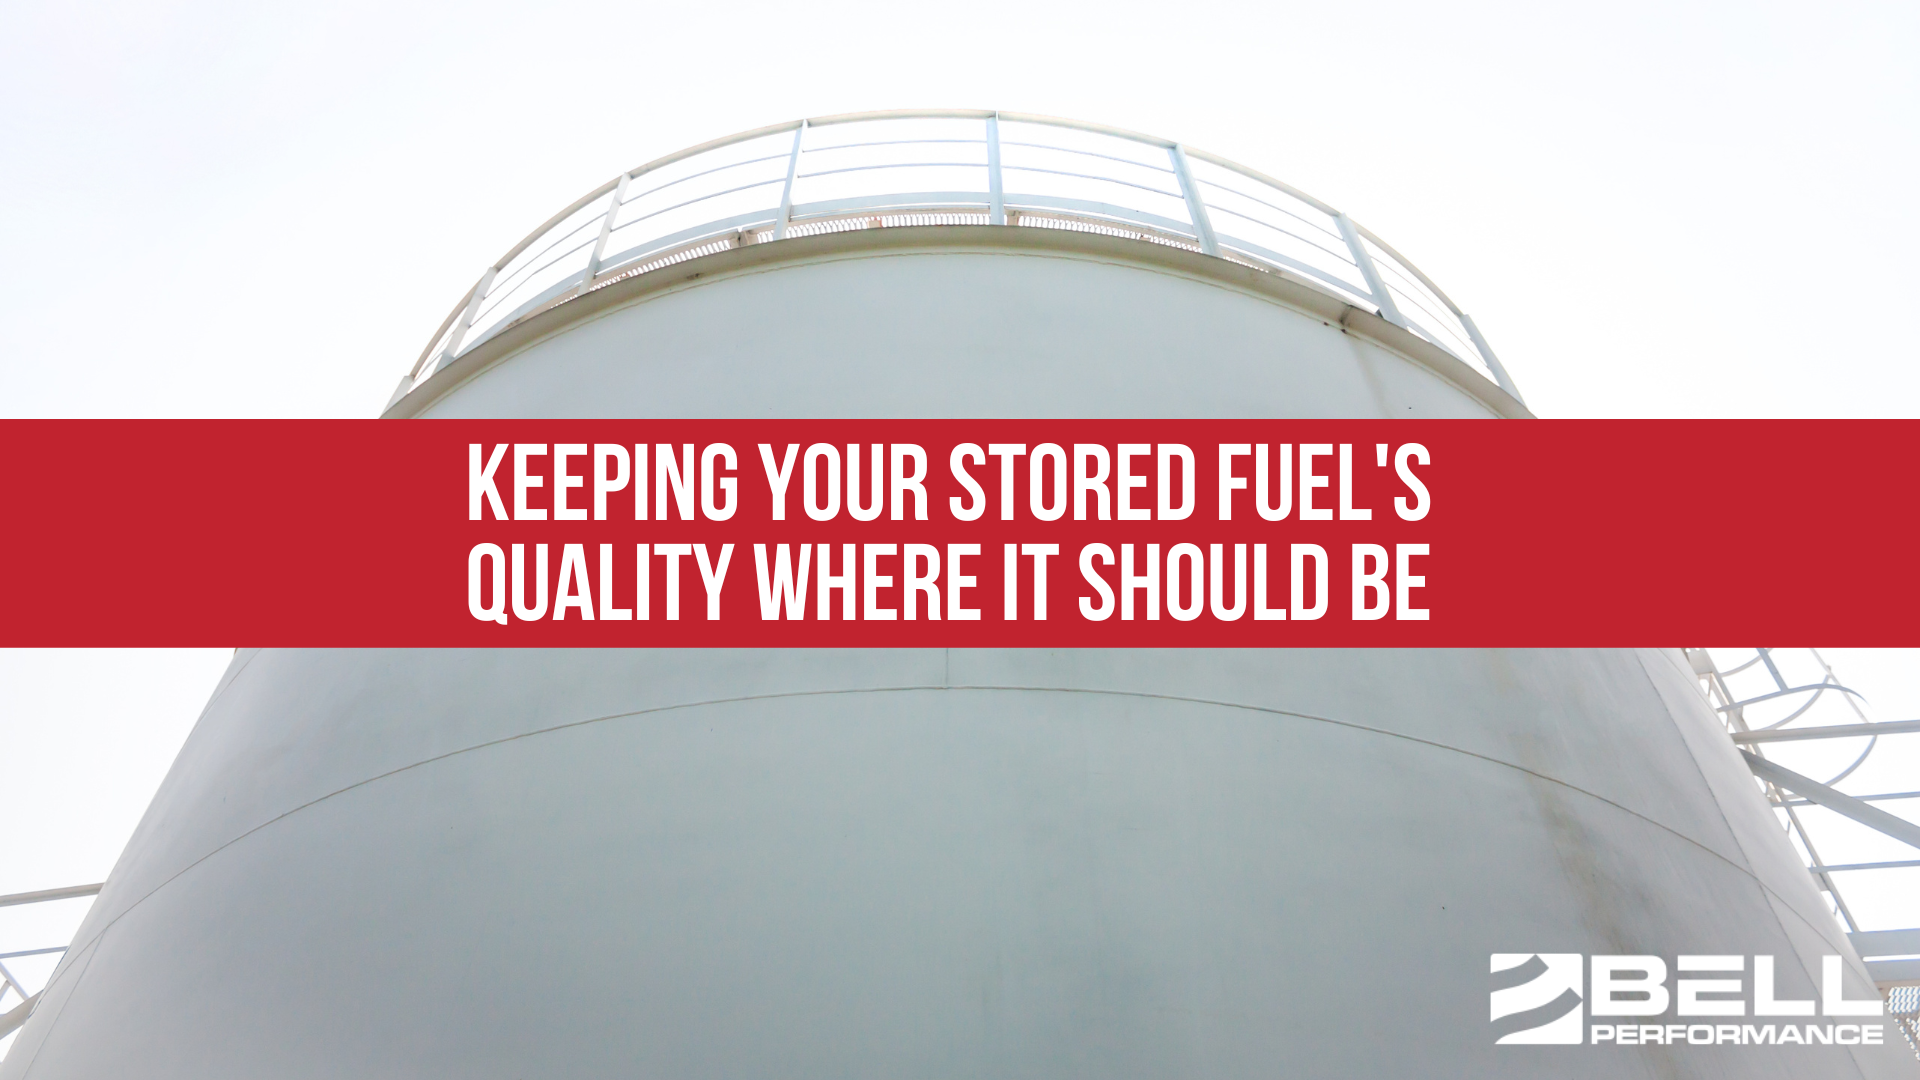 Keeping Your Stored Fuel's Quality Where It Should Be